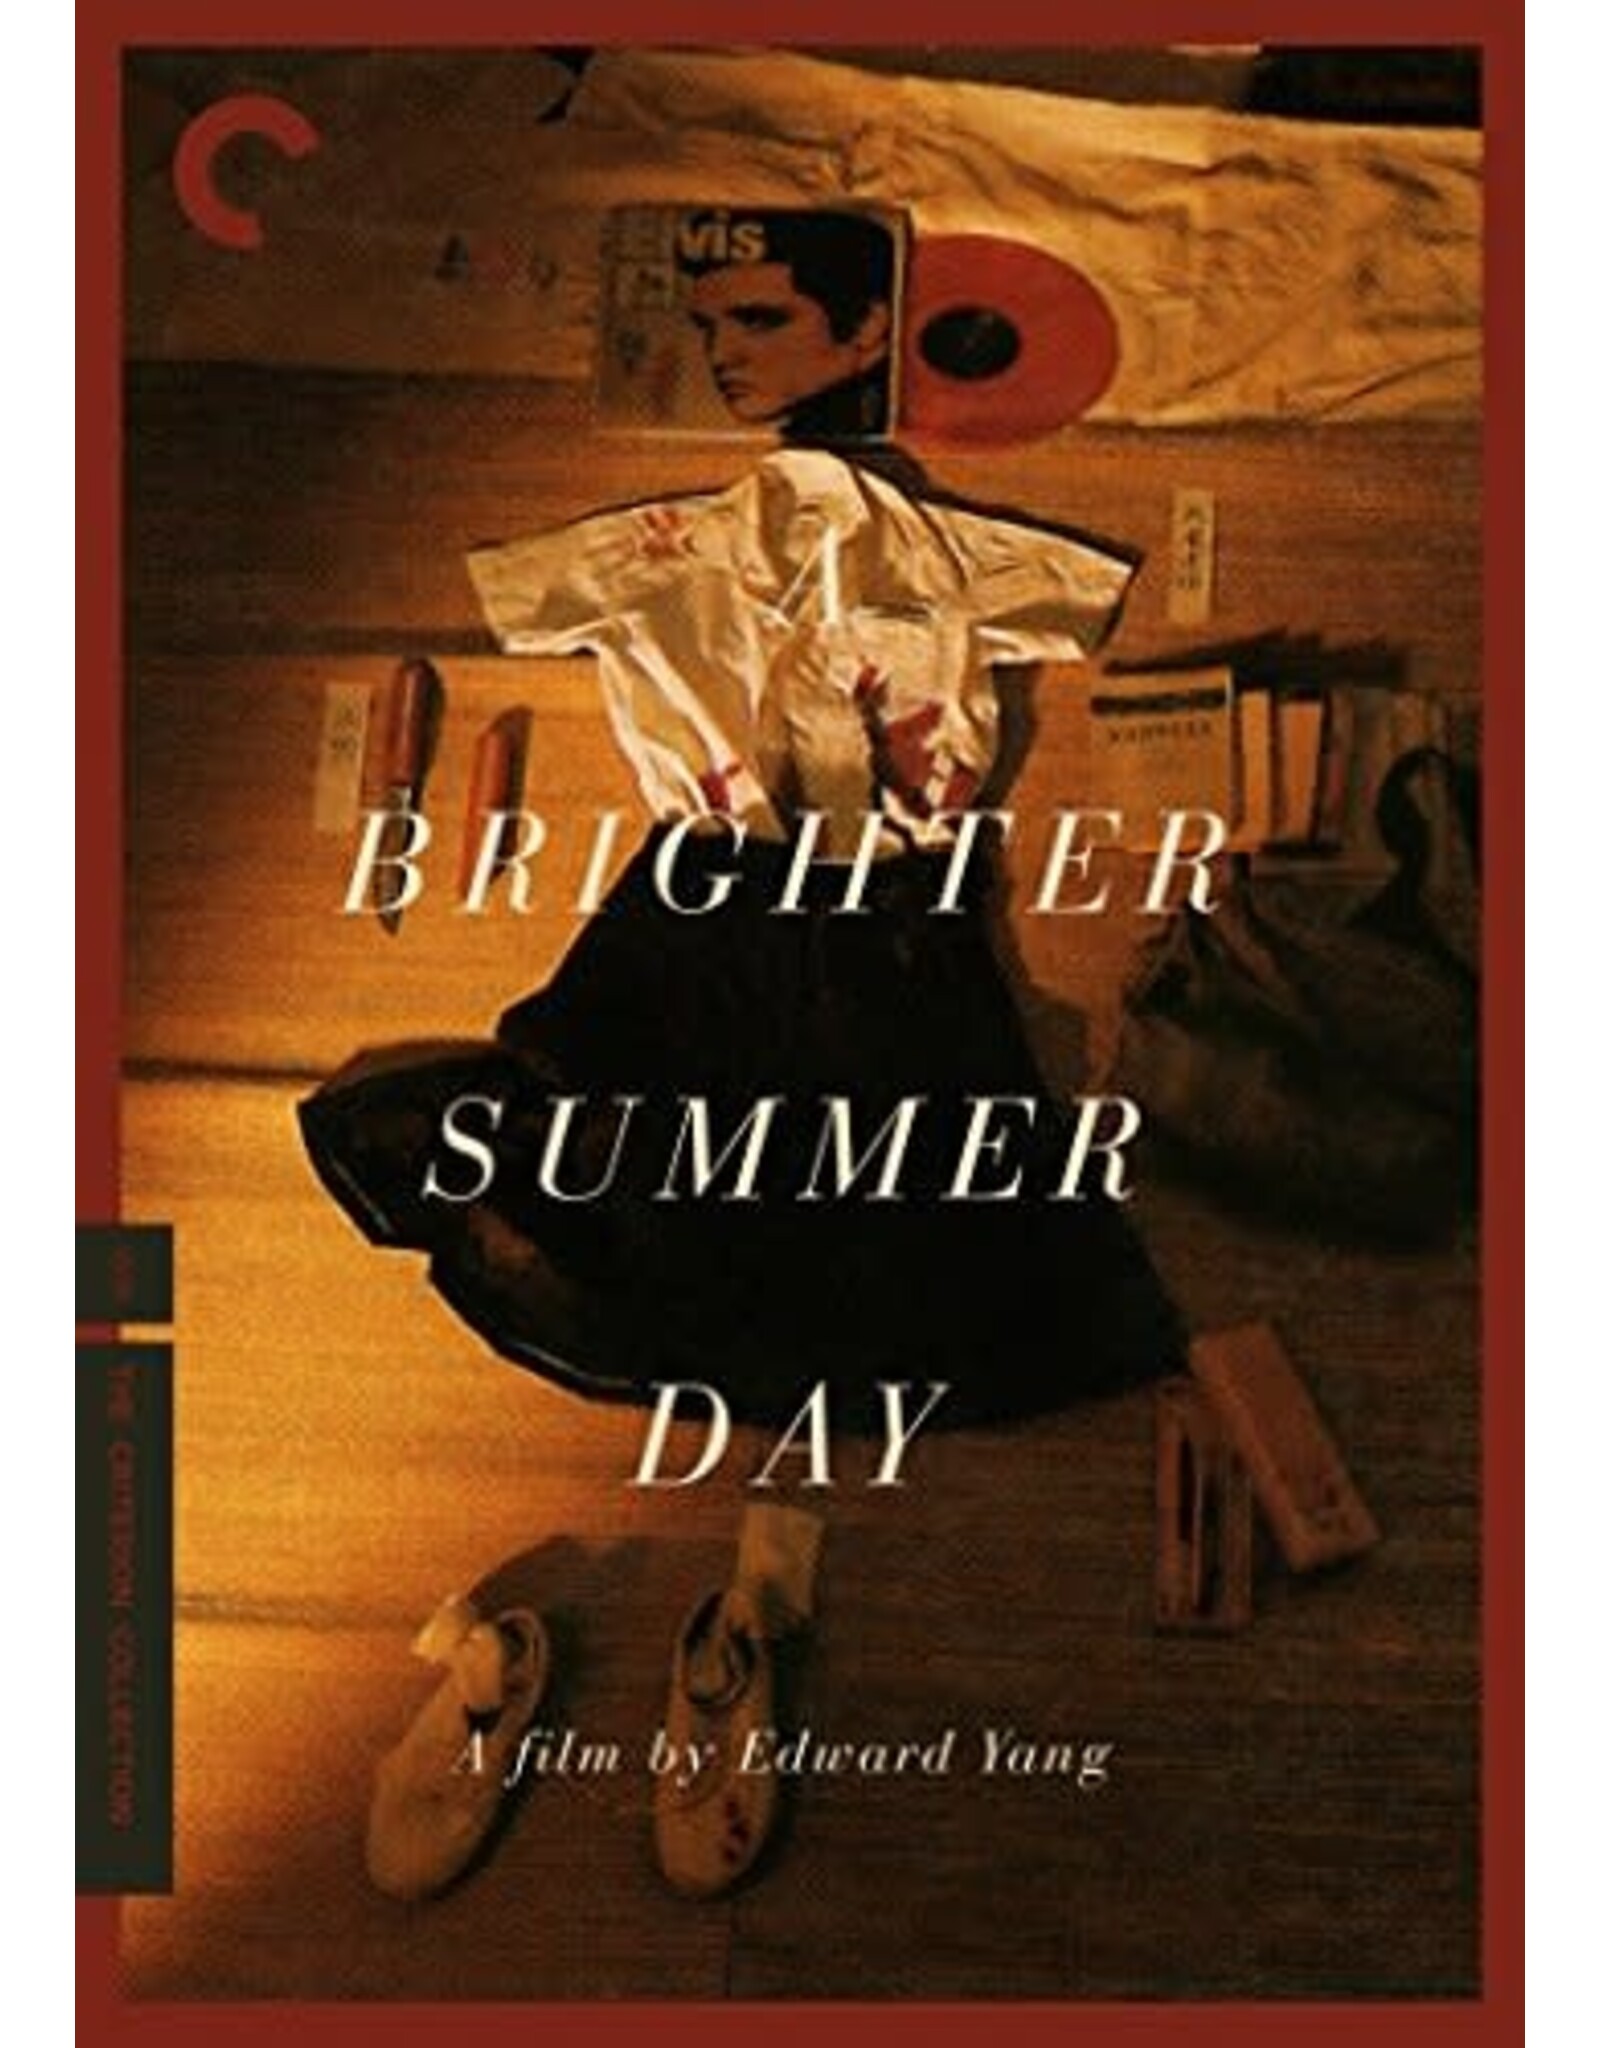 Criterion Collection A Brighter Summer Day - Criterion Collection (Brand New)